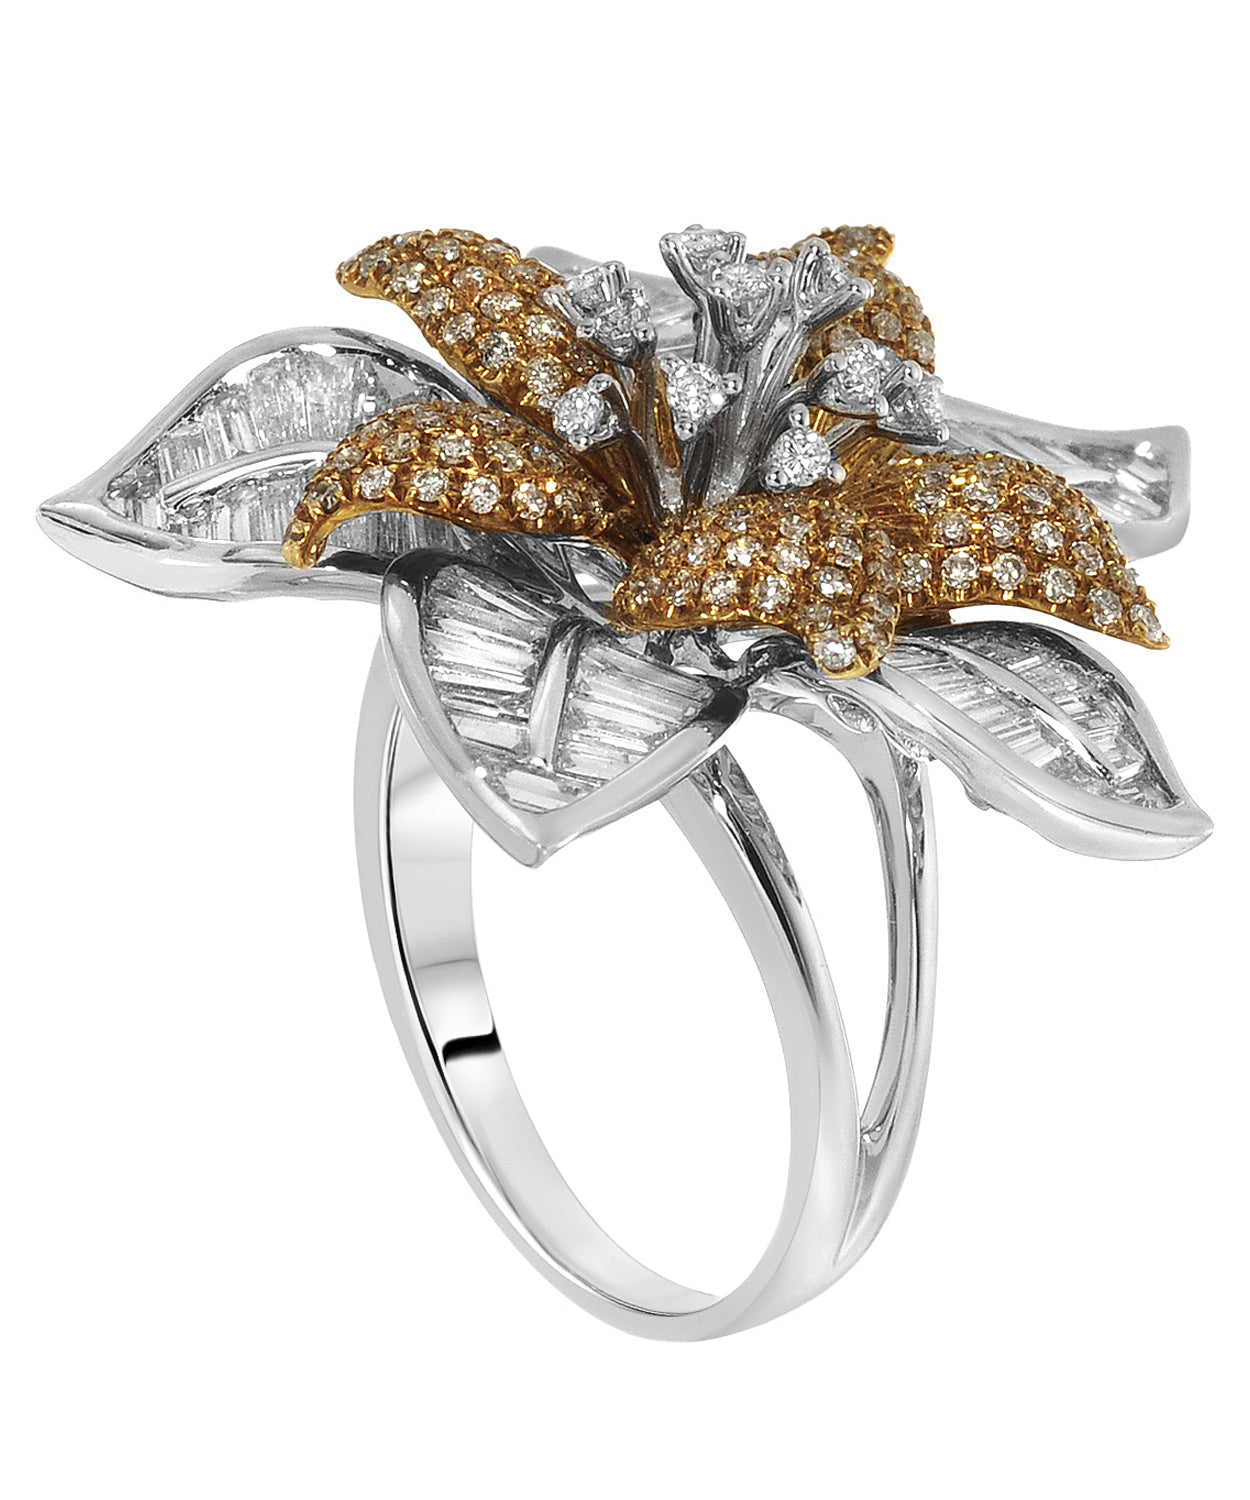 Allure Collection 3.36 ctw Superior Diamond 18k Gold Flower Cocktail Ring View 2